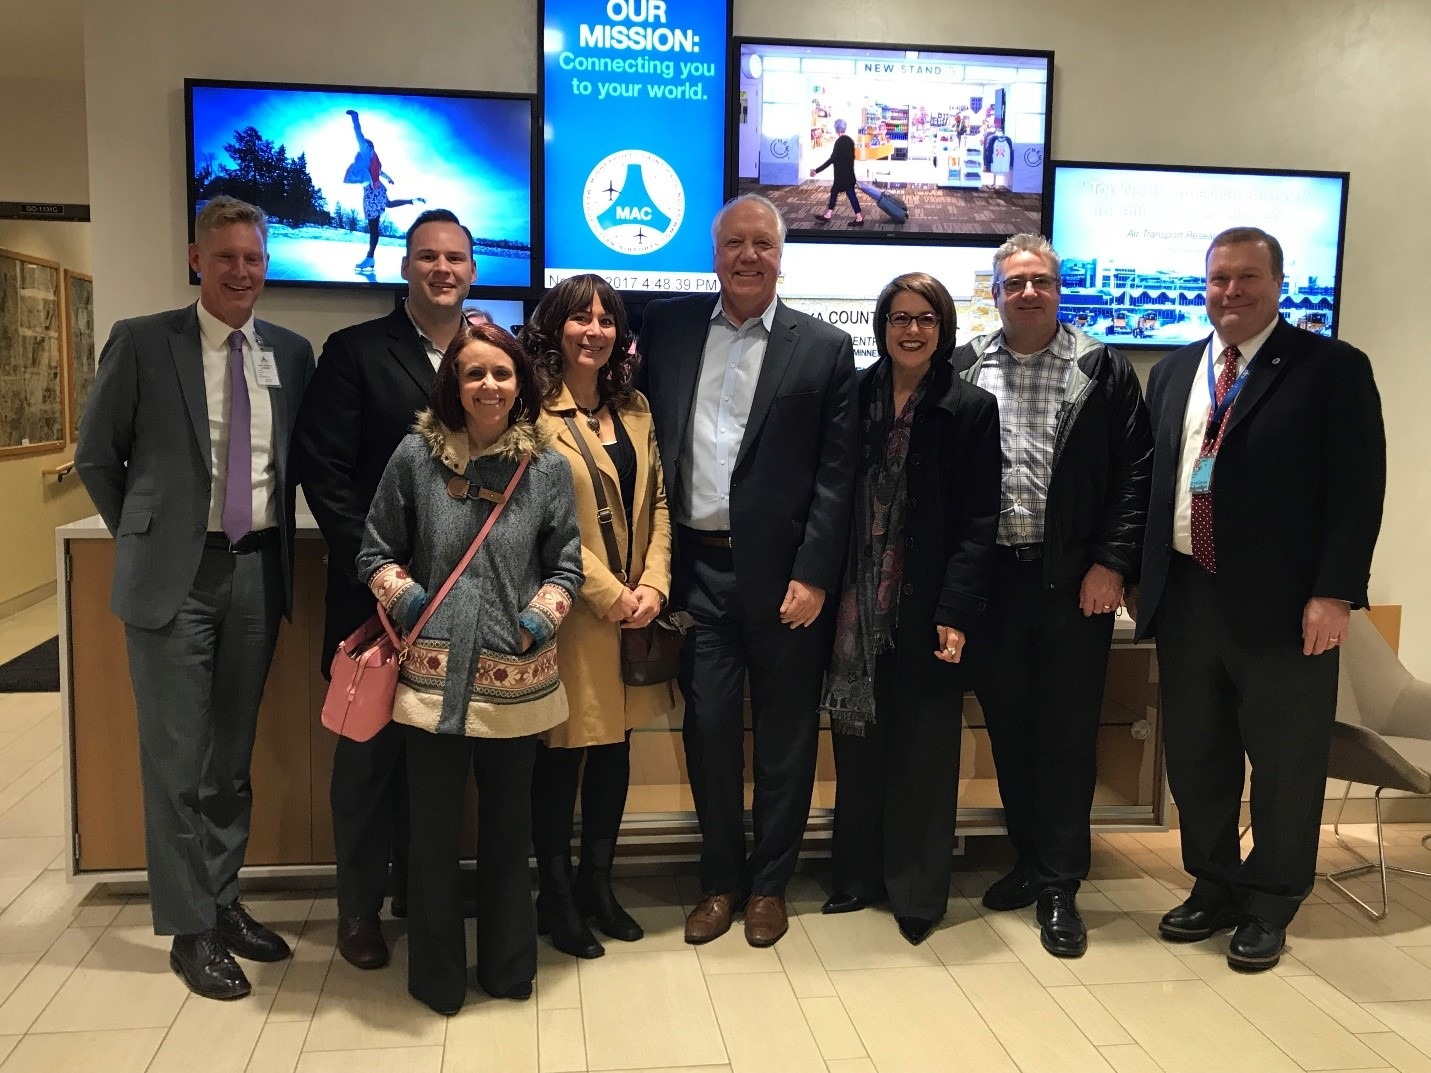 The TALENT Software Services Team during their Behind the Scenes Tour at MSP Airport hosted by Rick King